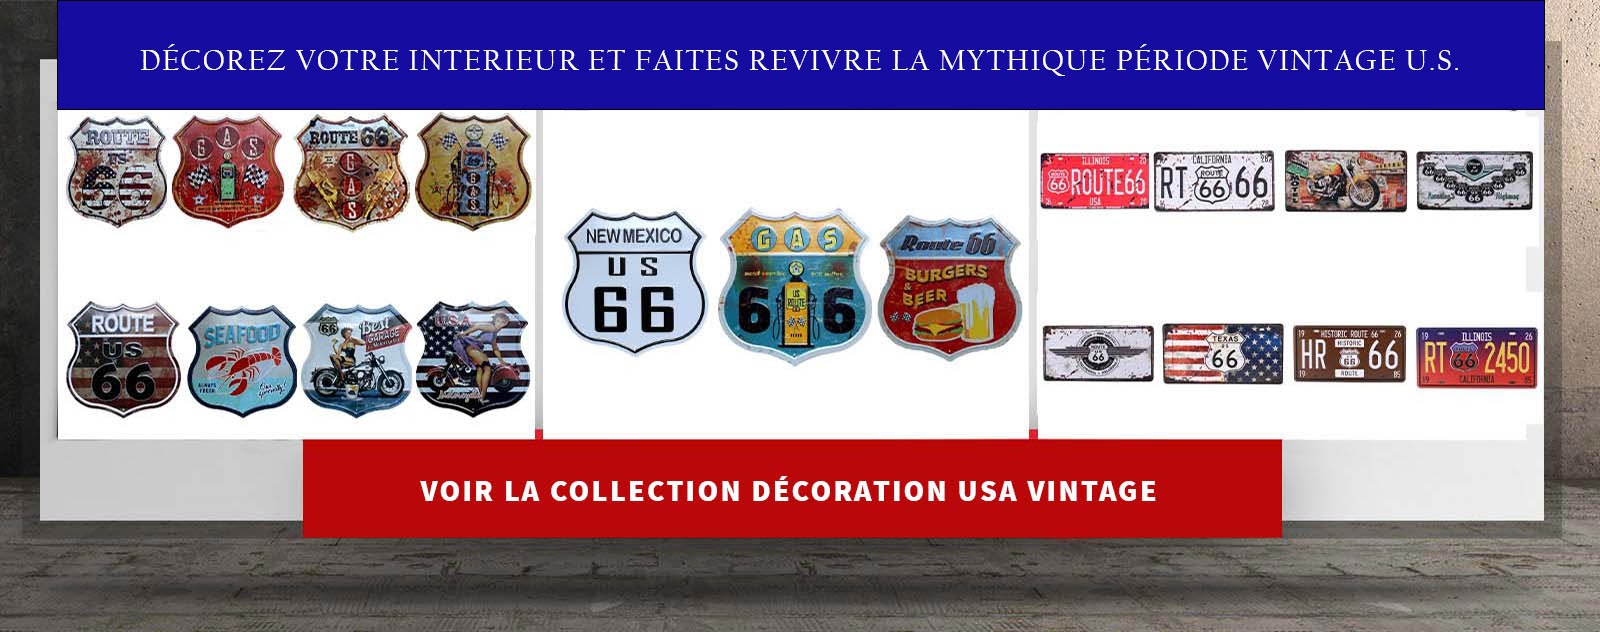 banniere vers collection decoration usa